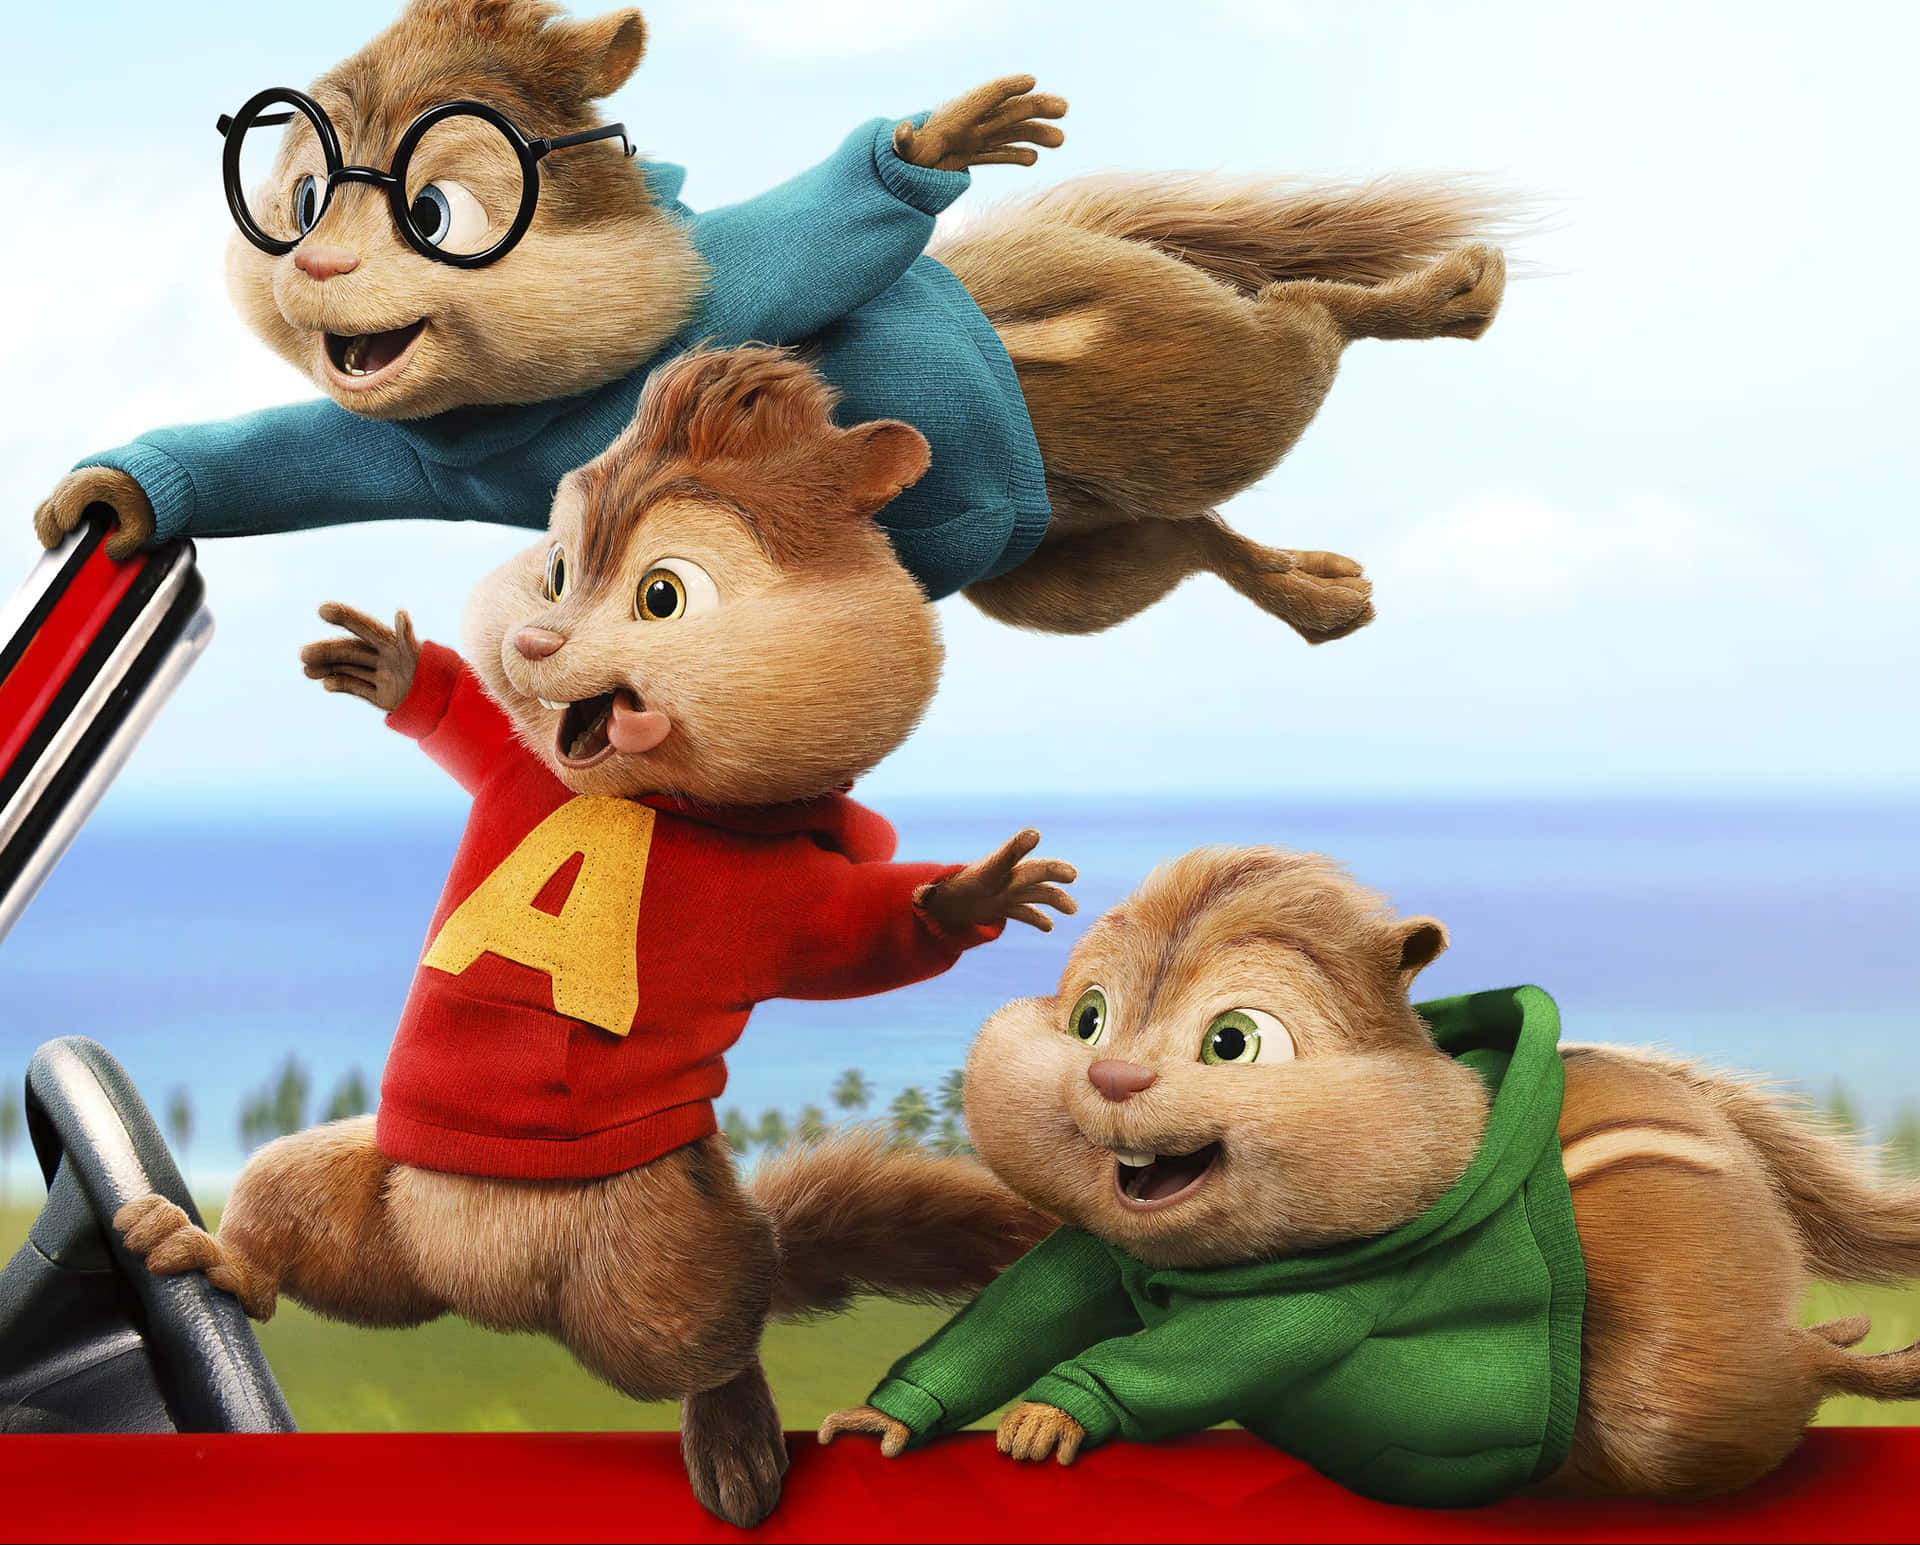 Join in the fun with Alvin and The Chipmunks